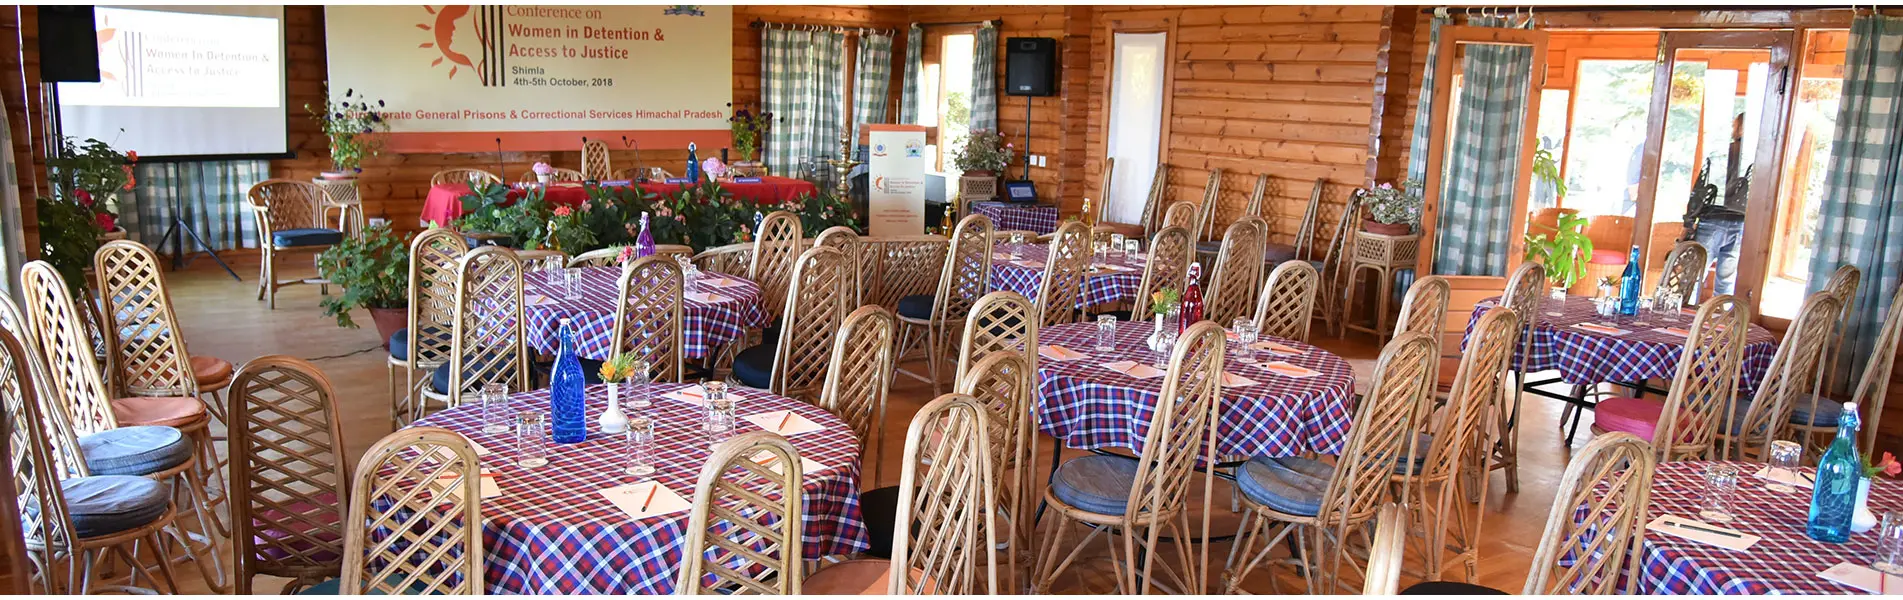 Leave a lasting impression by hosting corporate events at Chalets Naldehra